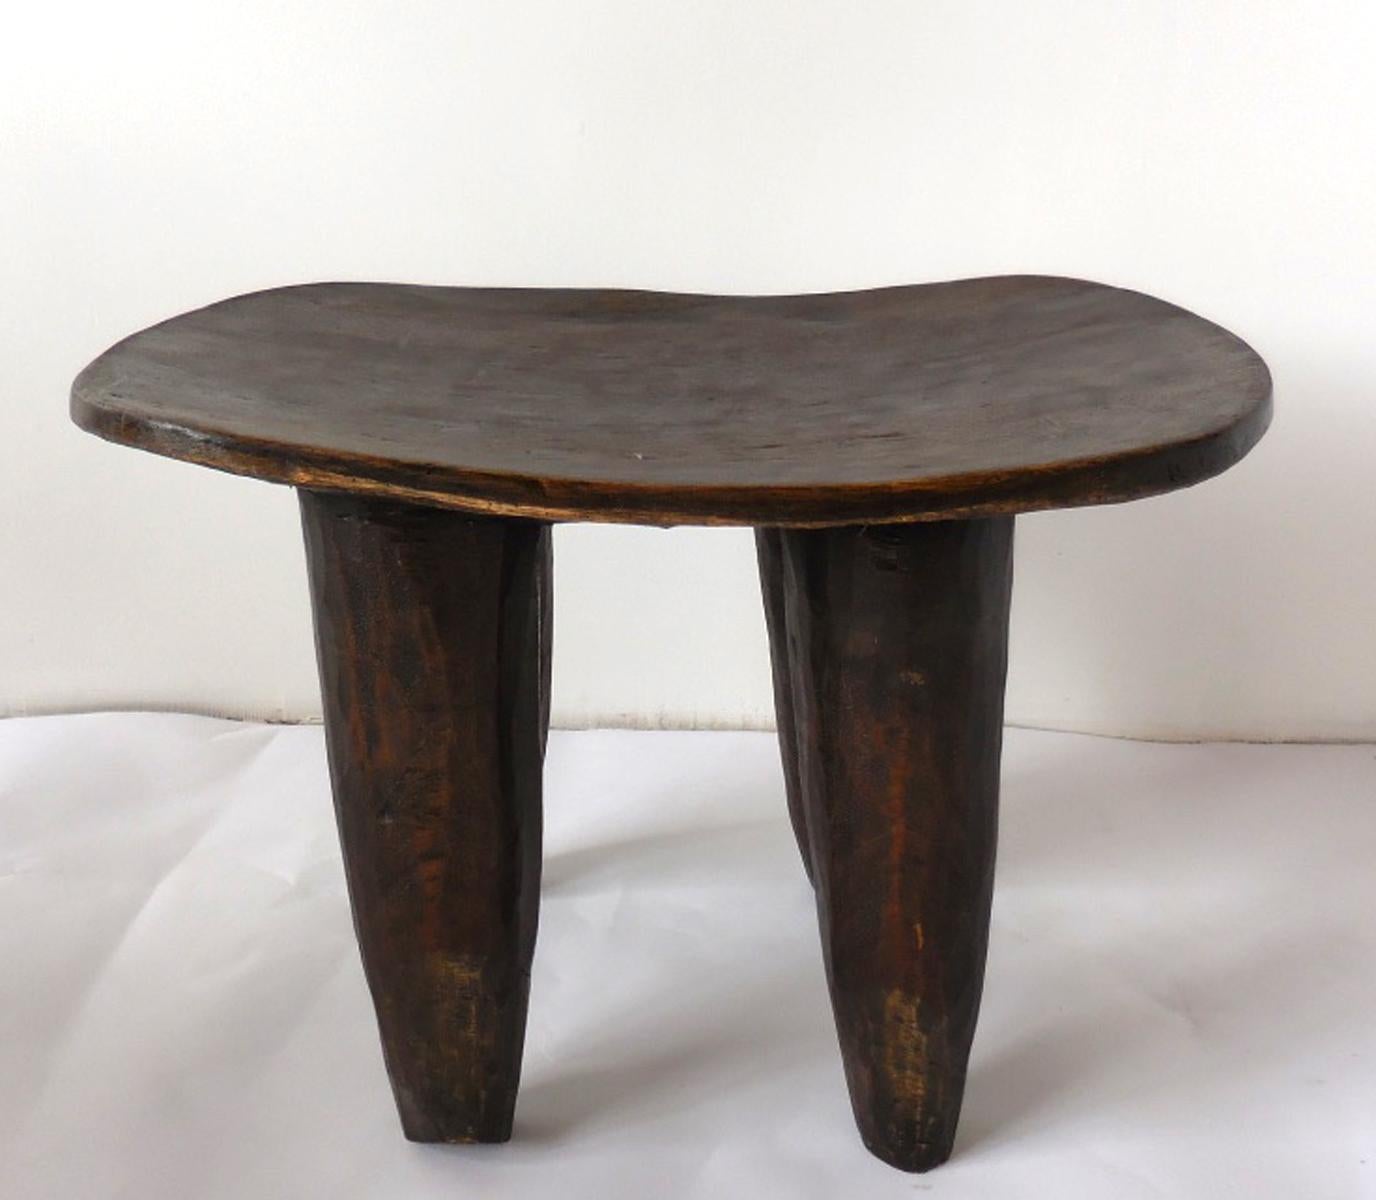 Carved out of one piece of wood, this is a traditional tribal stool from the Senufo tribe in Mali. Conical legs and slightly undulating top. Soft worn patina. Can be used as a stool or a side table.